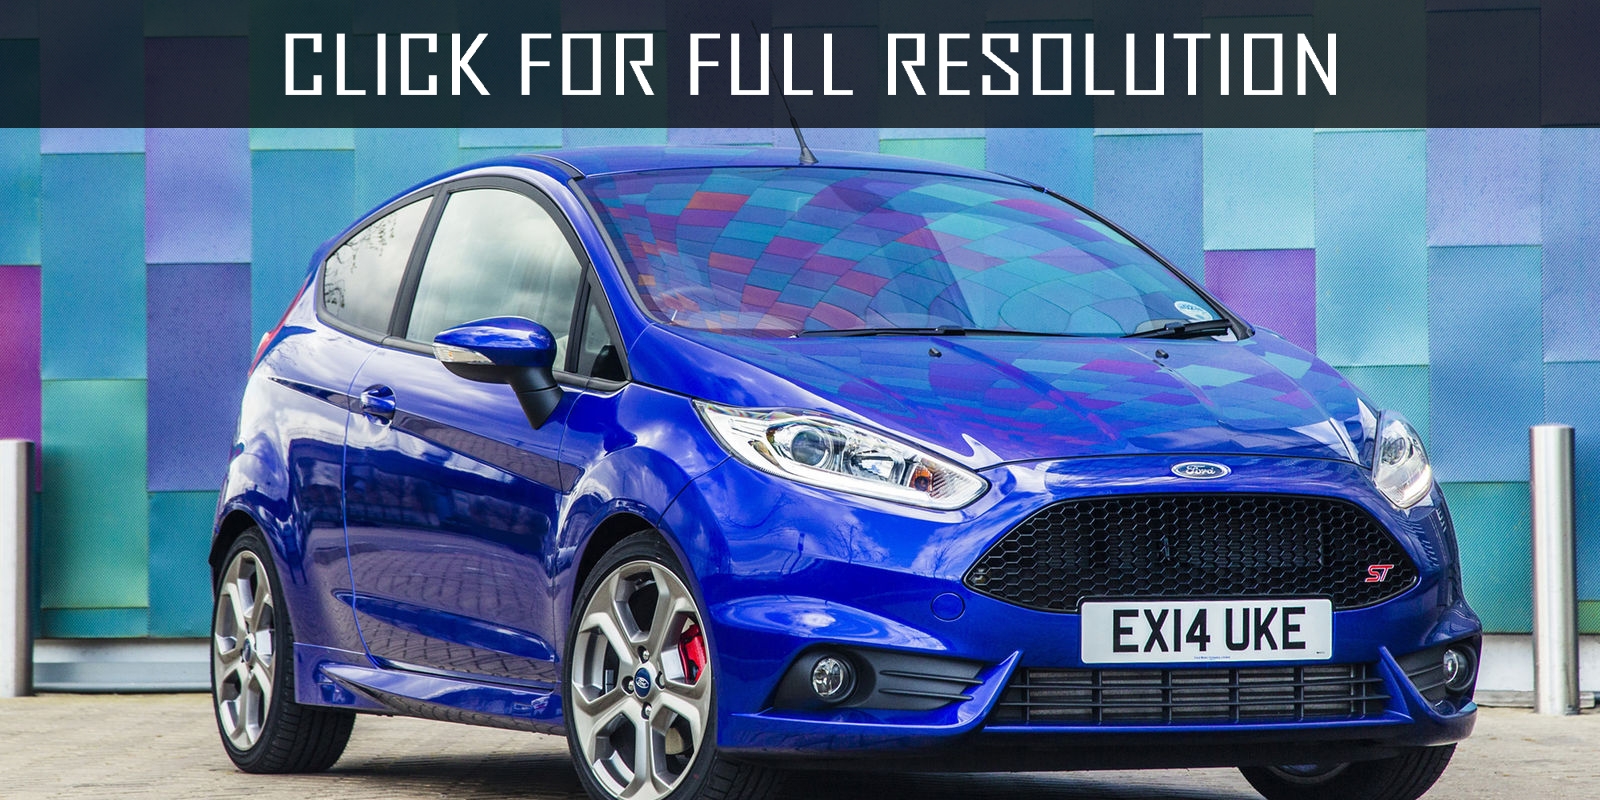 15 Ford Fiesta St Best Image Gallery 8 12 Share And Download